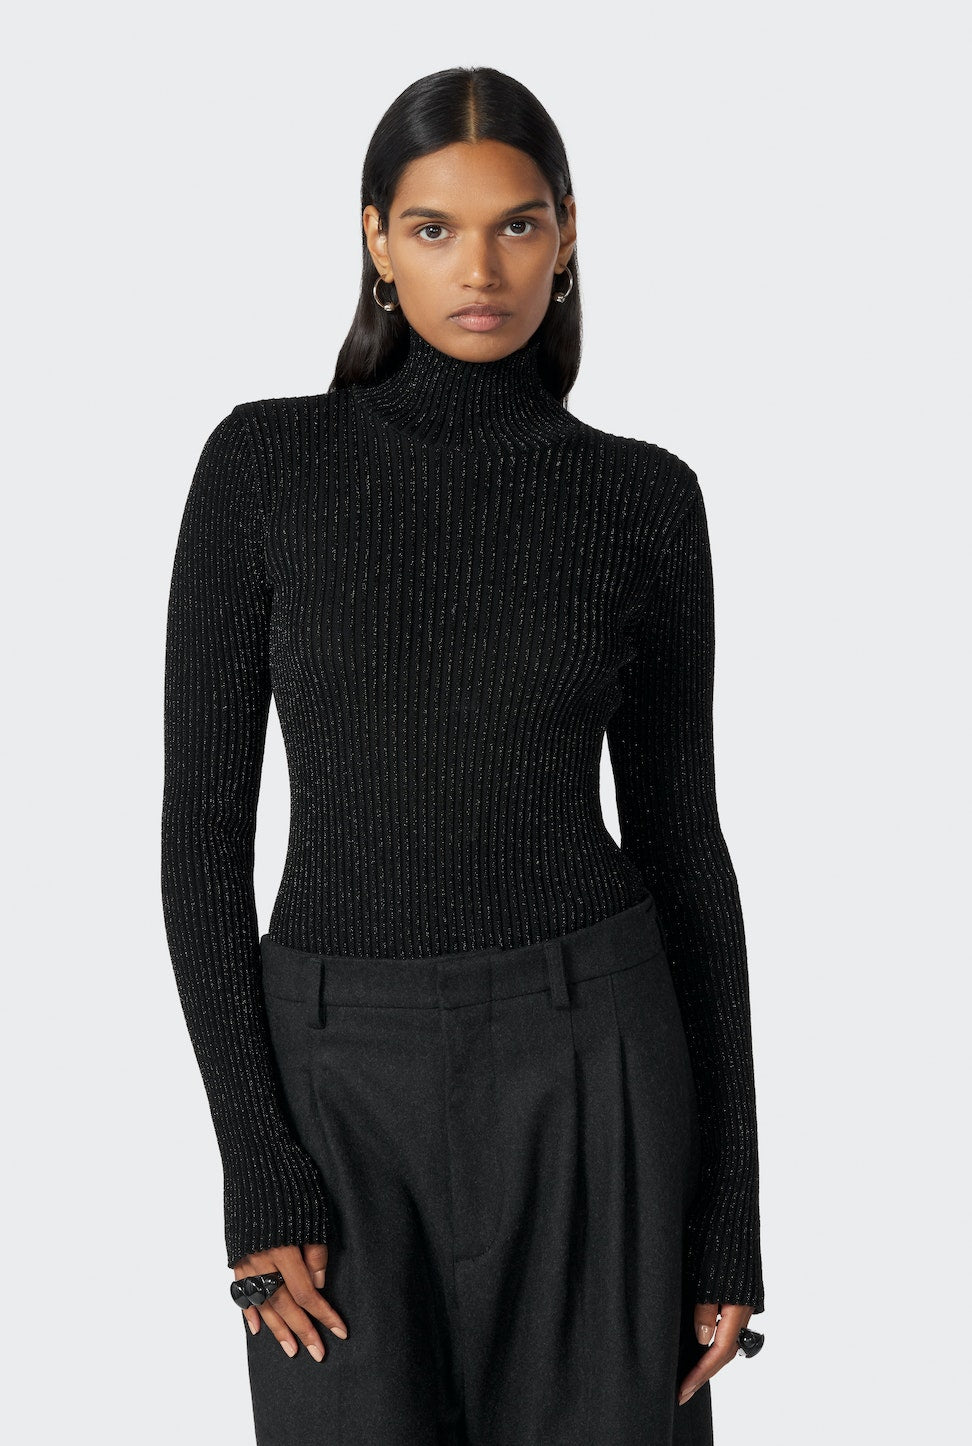 The Cyber Knit Top